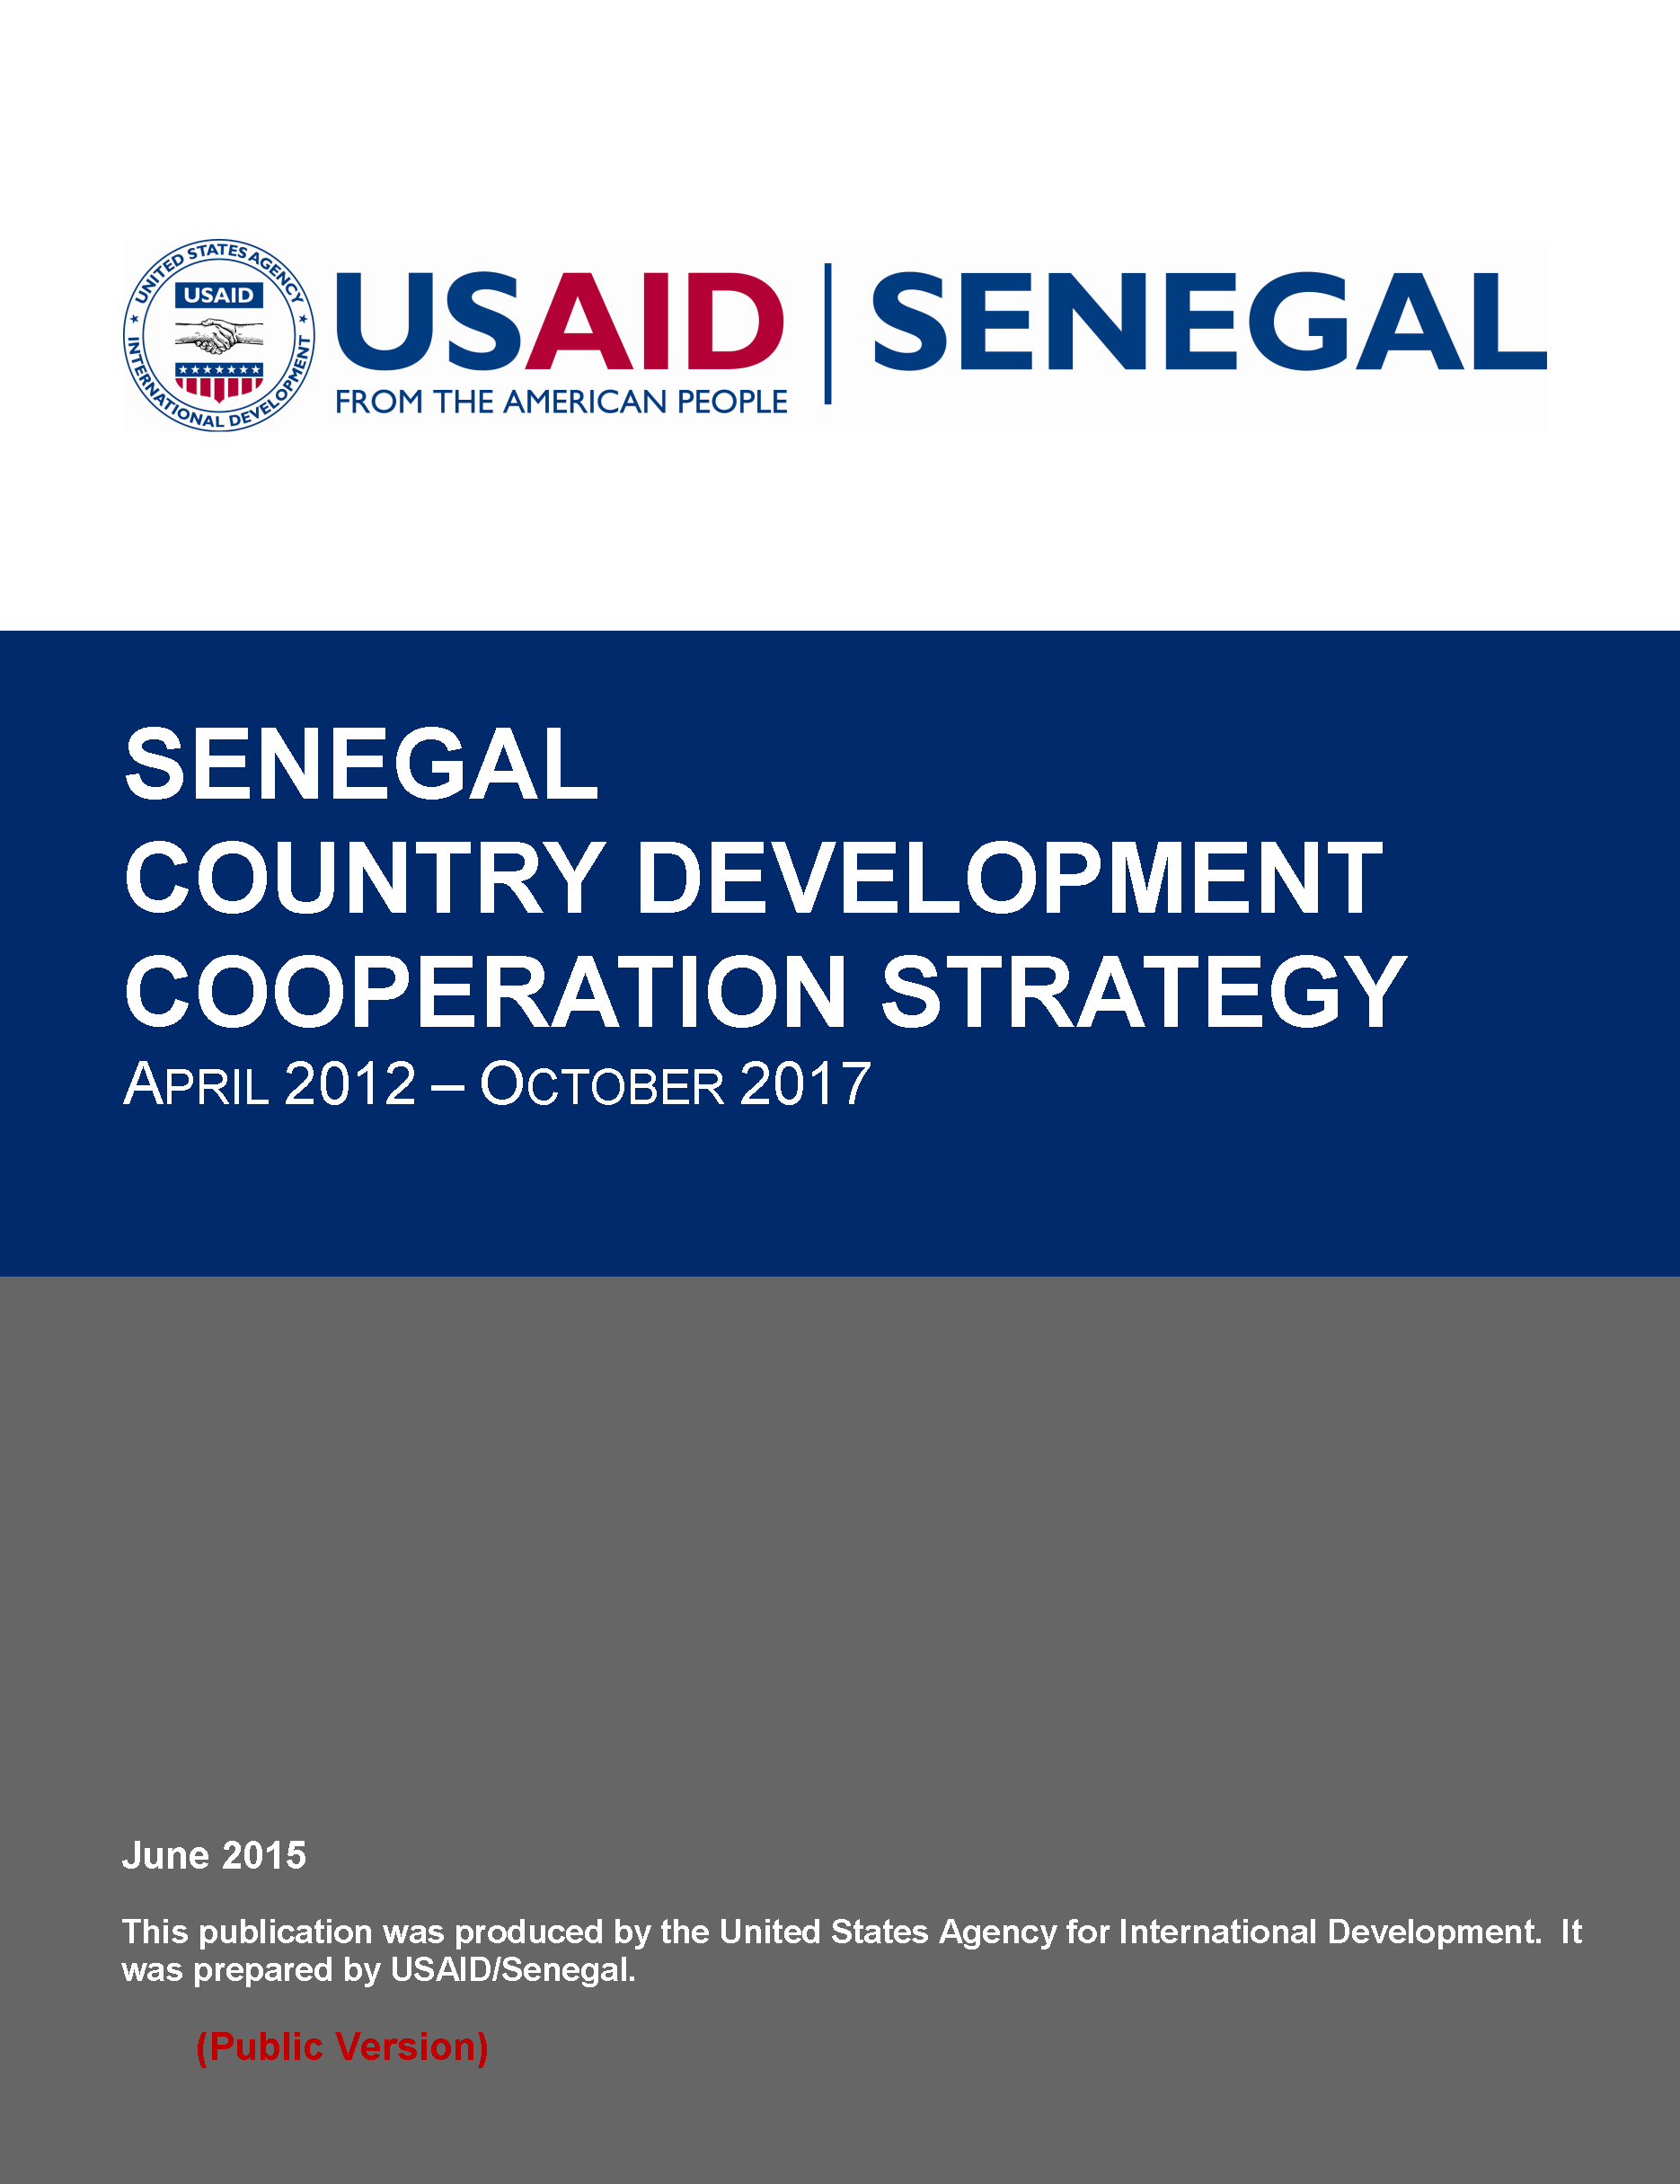 USAID/Senegal Country Development Cooperation Strategy 2012-2017